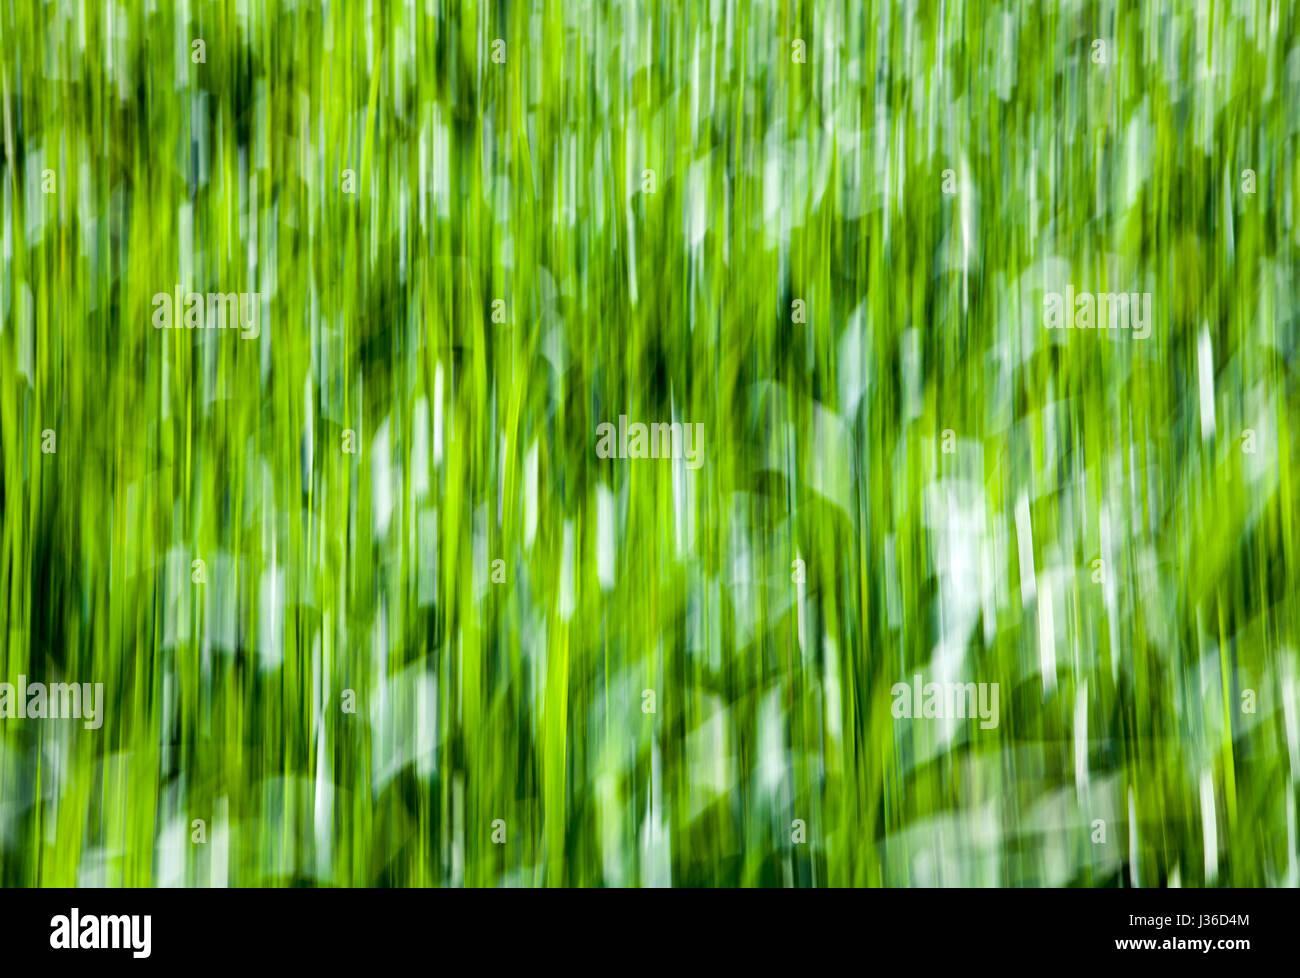 Abstract lines and structures in green grass, closeup, with a blurred wipe effect Stock Photo